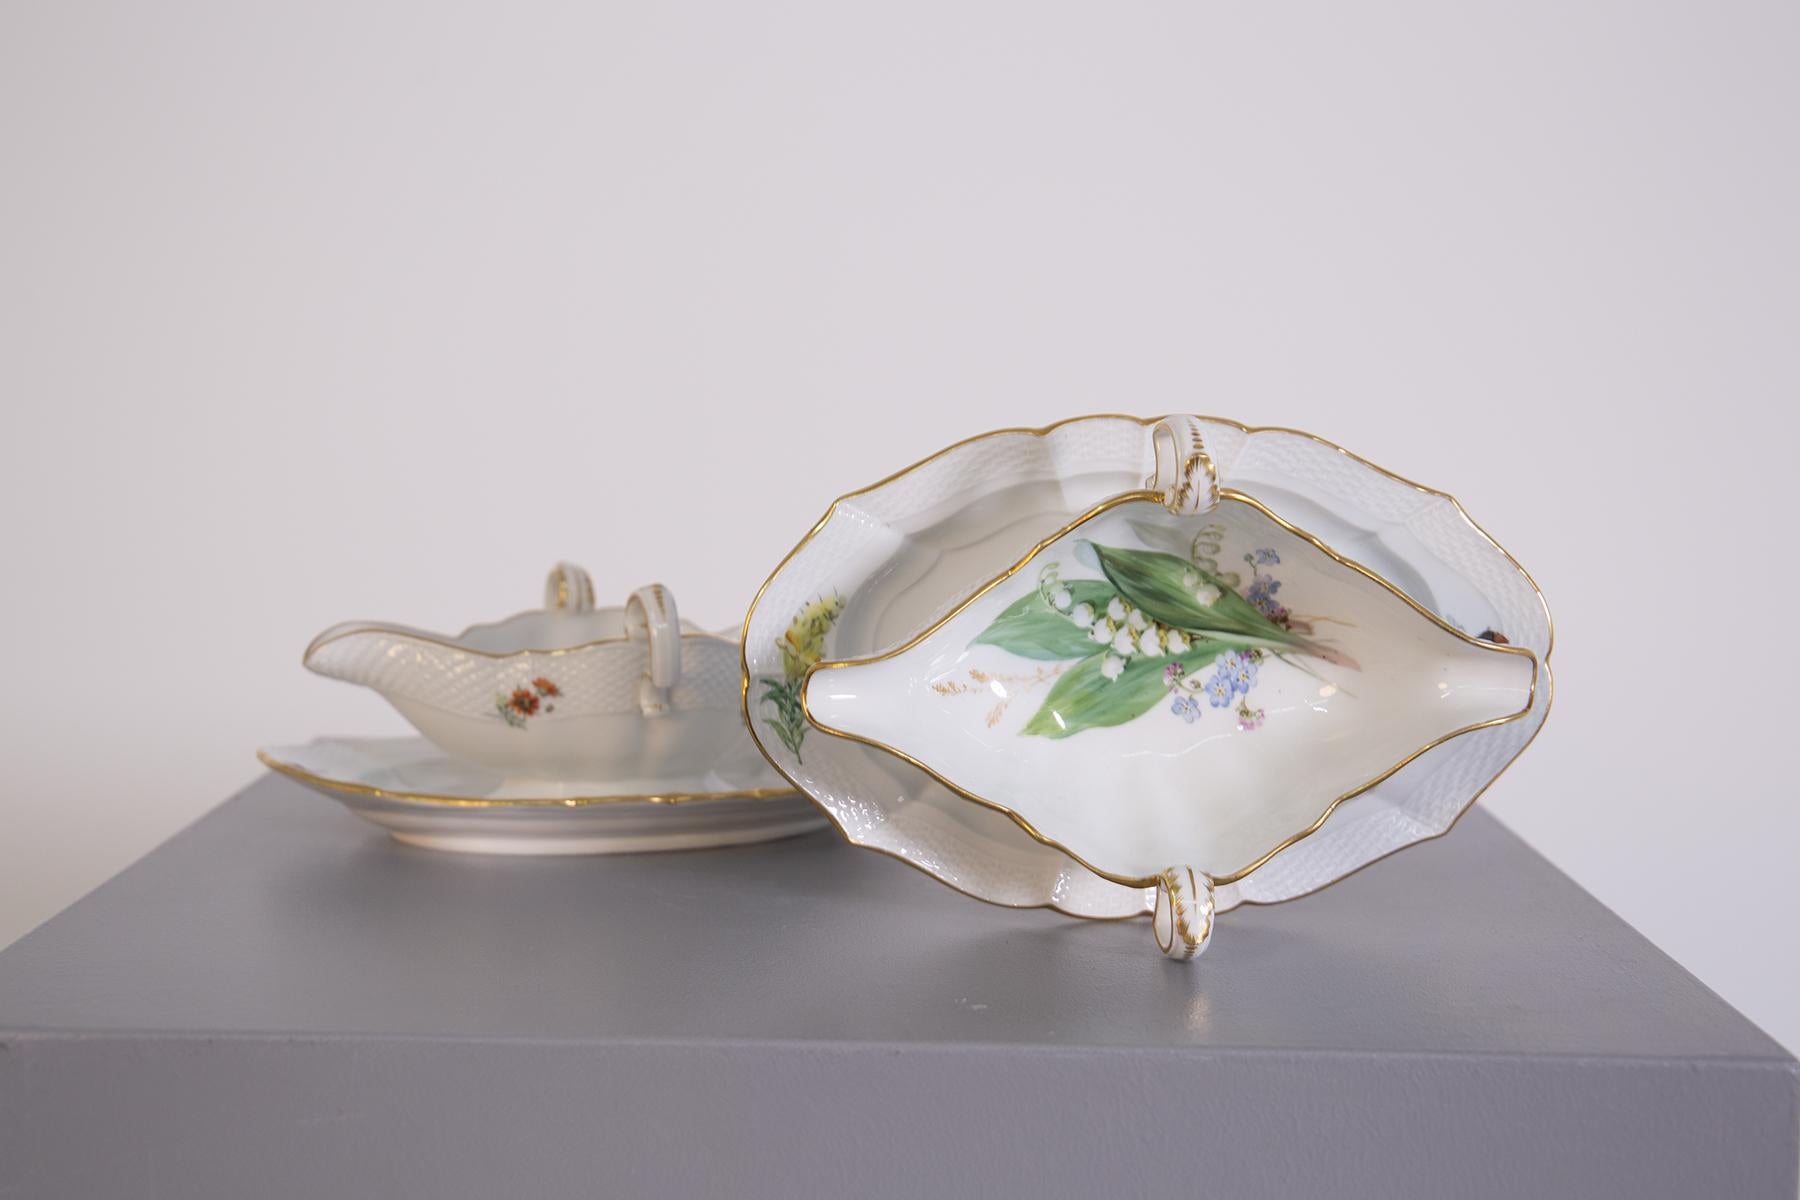 German Pair of Meissen Legume Dishes from the Marcolini Period, 18th Century For Sale